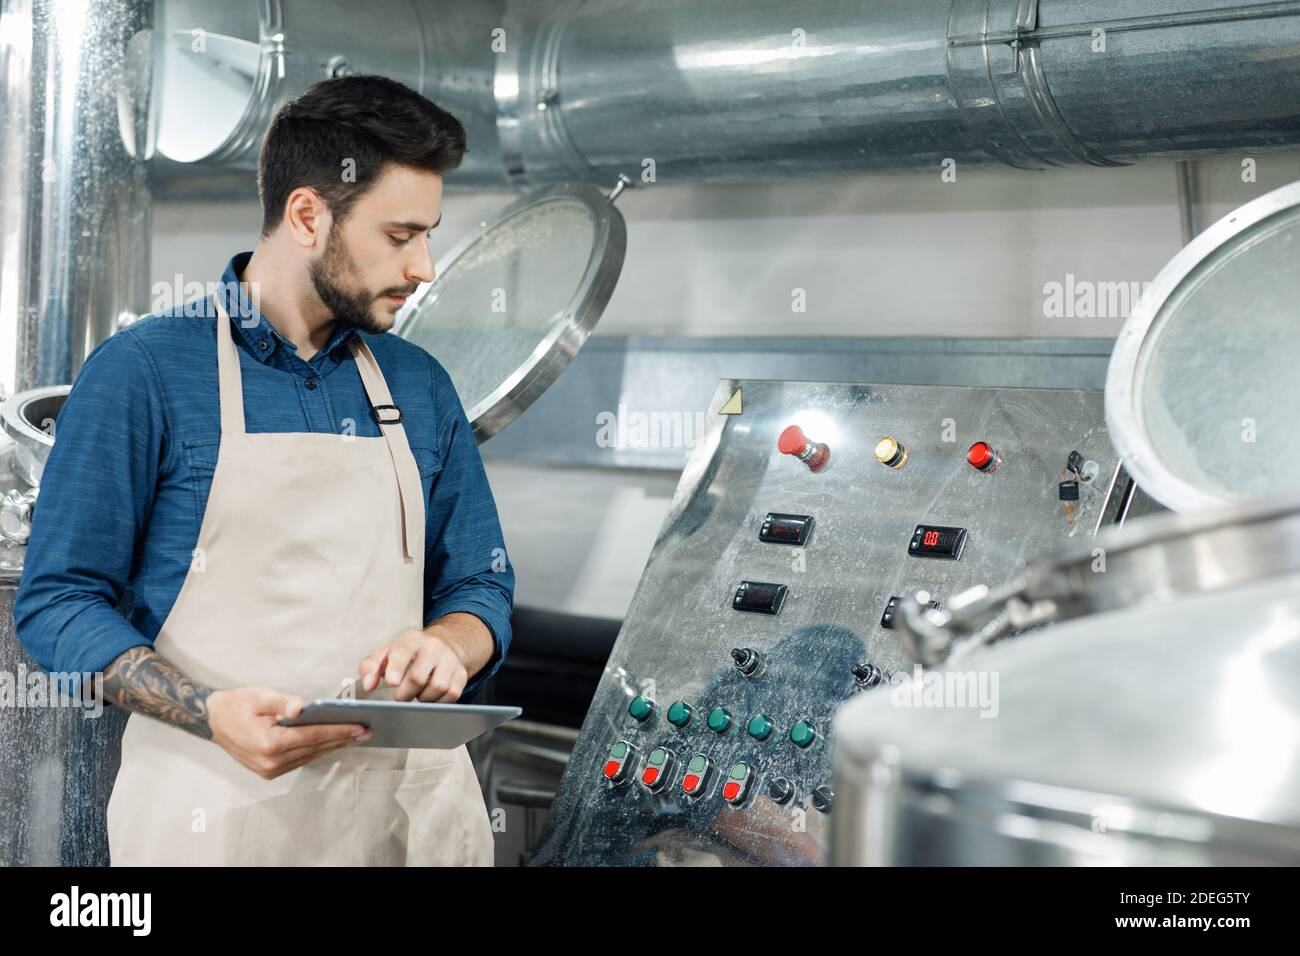 Drink production, inspection management control and small business Stock Photo